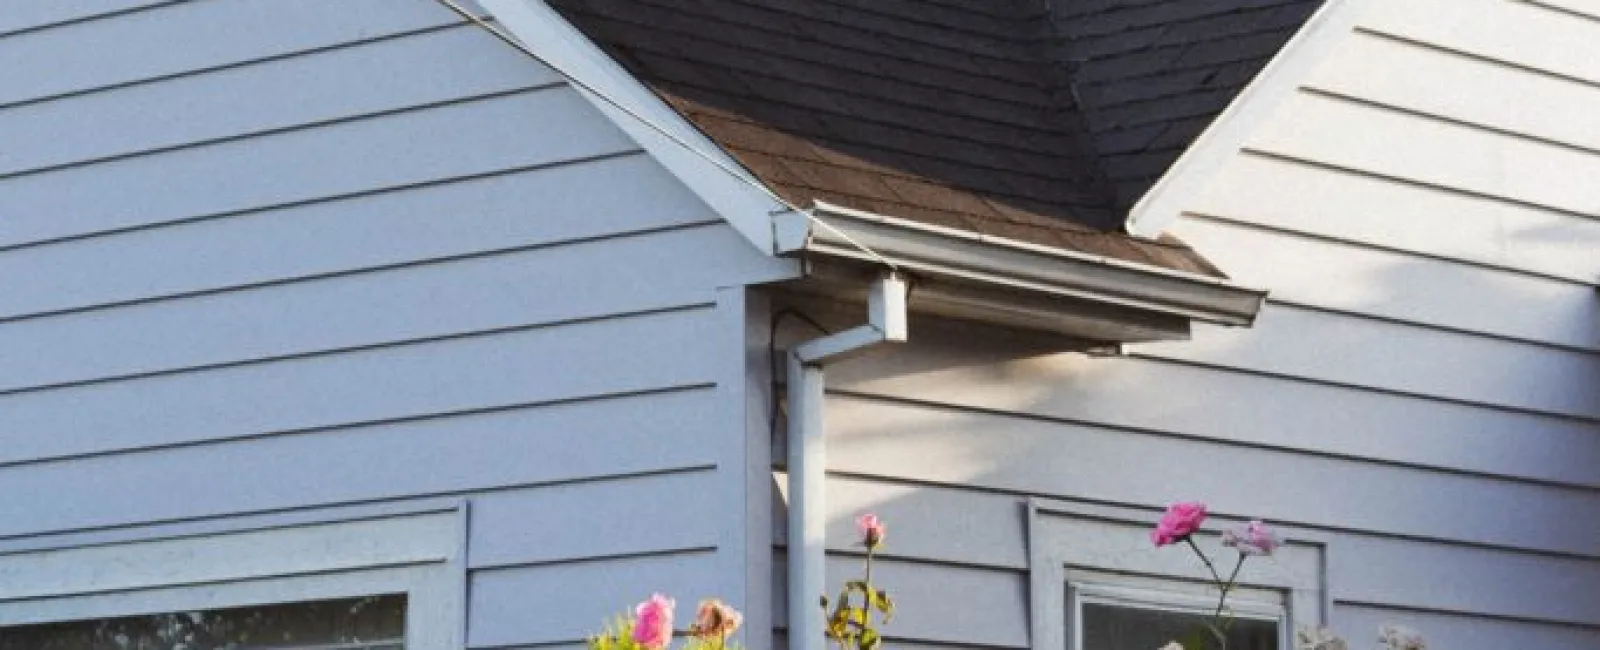 How Summer Heat Can Impact Your Roofing System